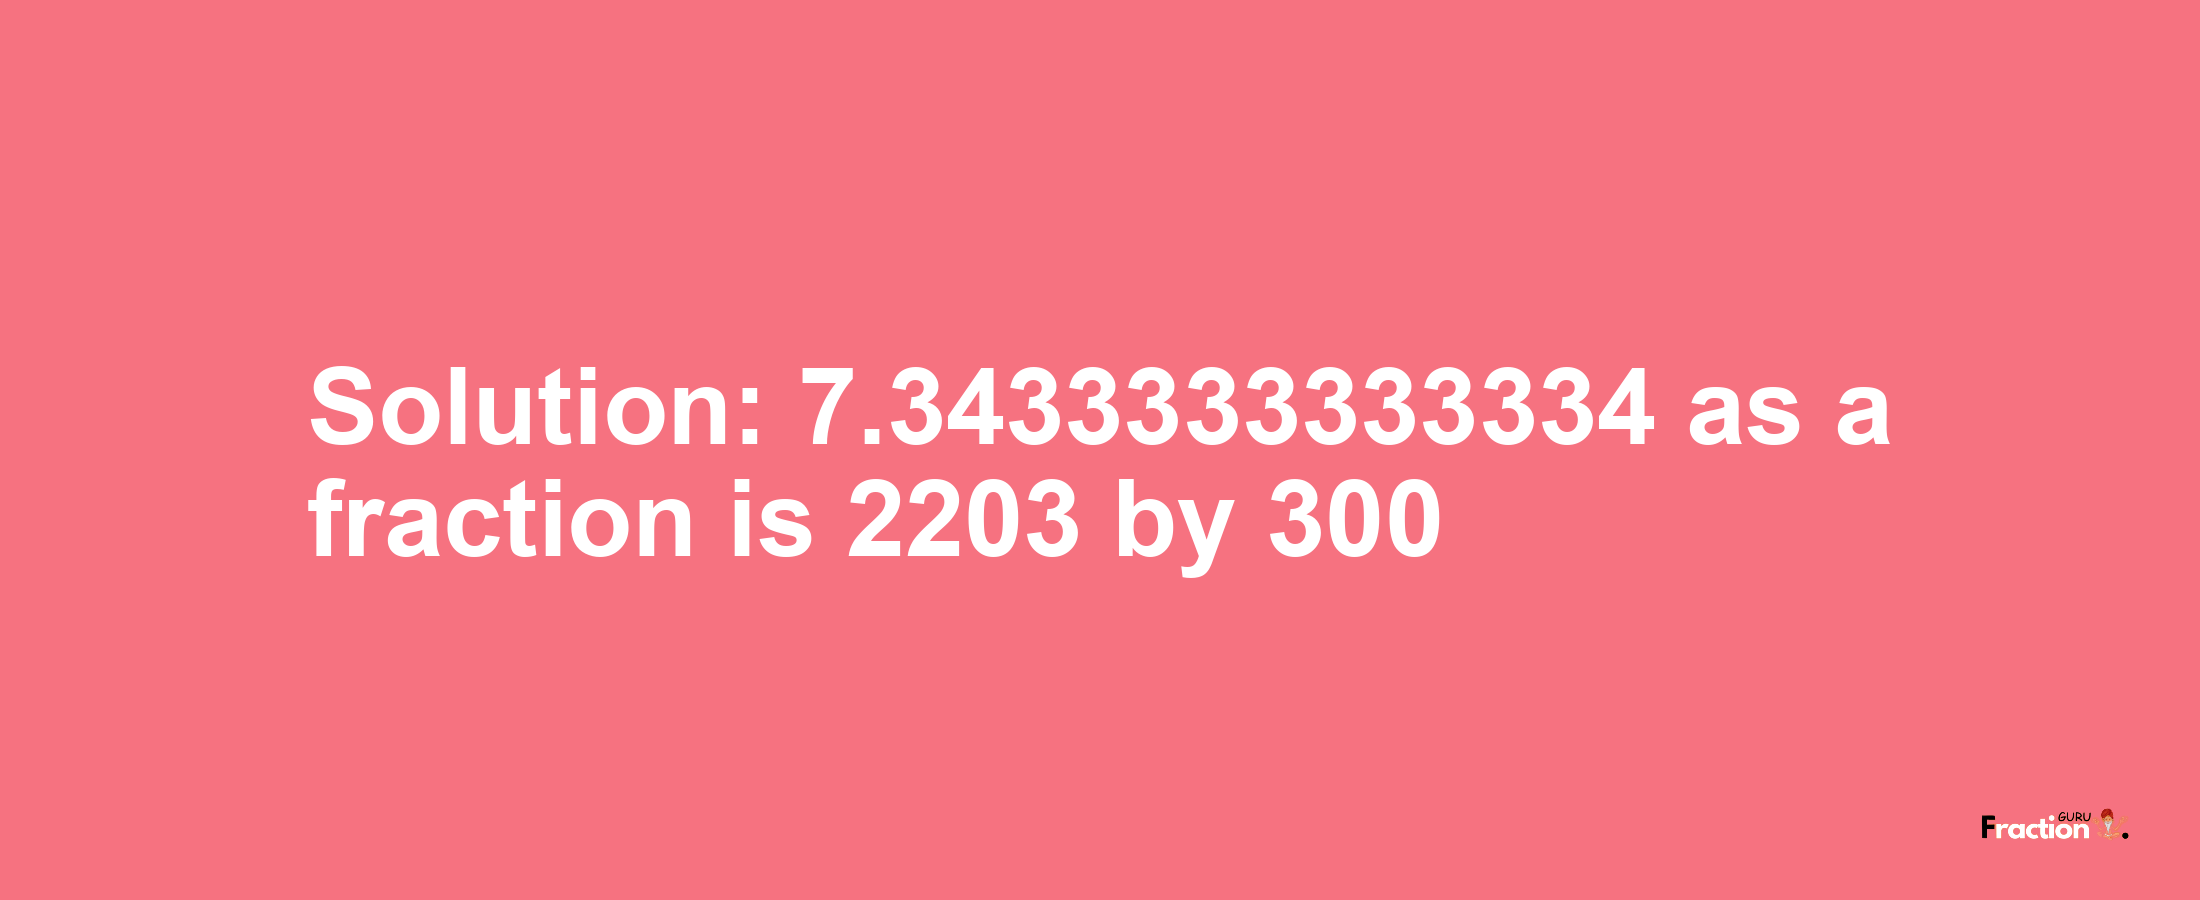 Solution:7.3433333333334 as a fraction is 2203/300